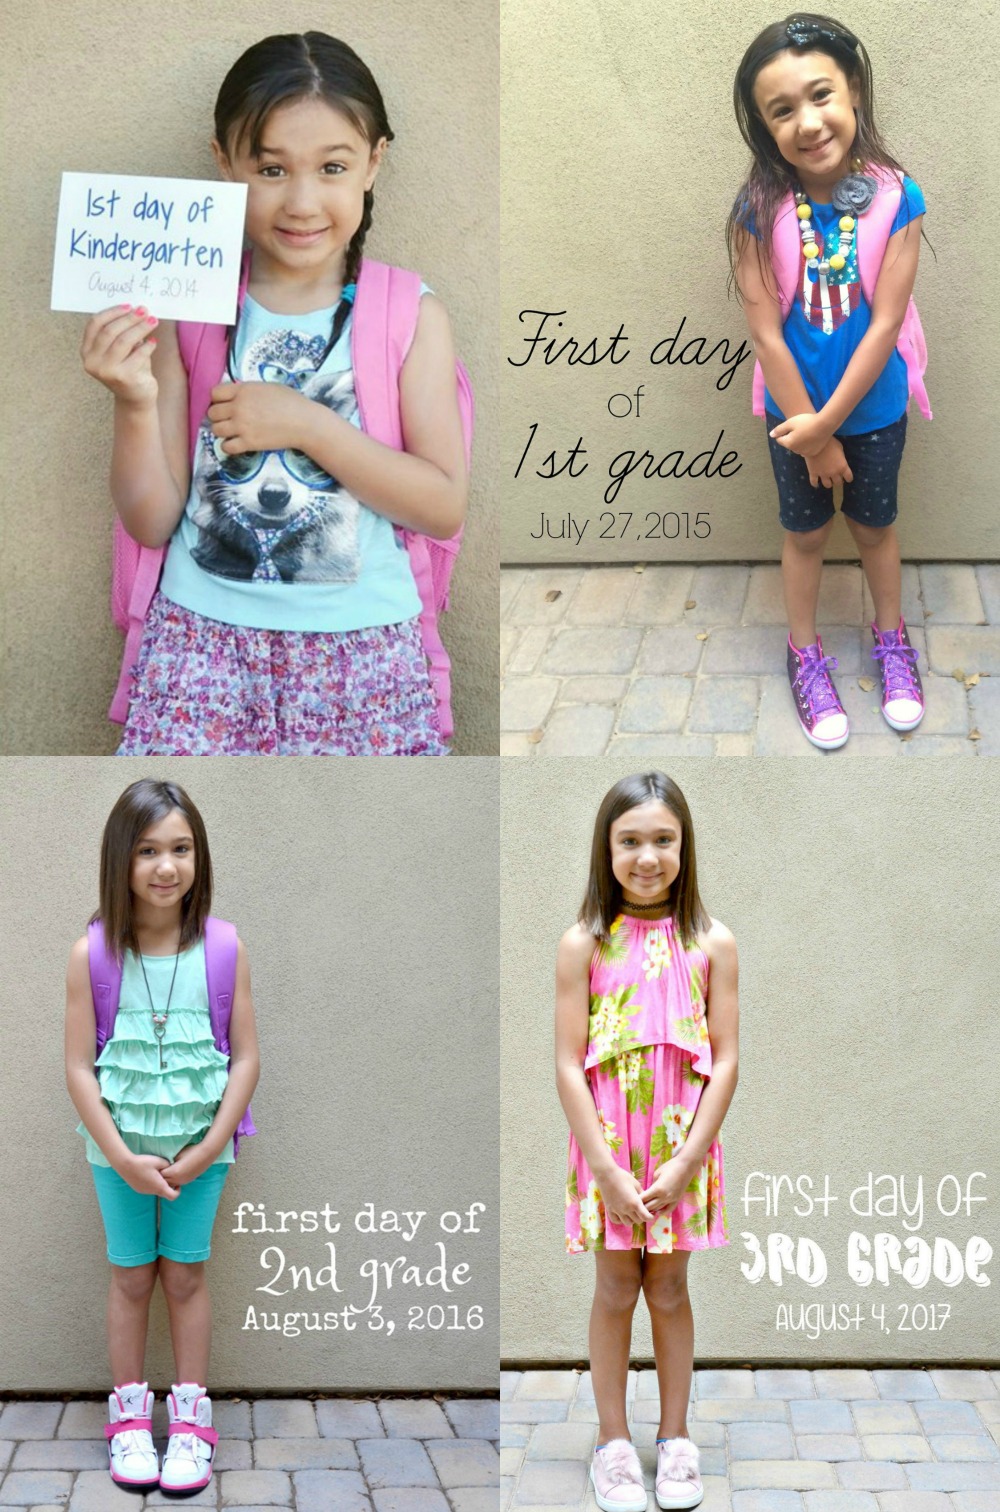 Take those first day back to school photos to look at later!